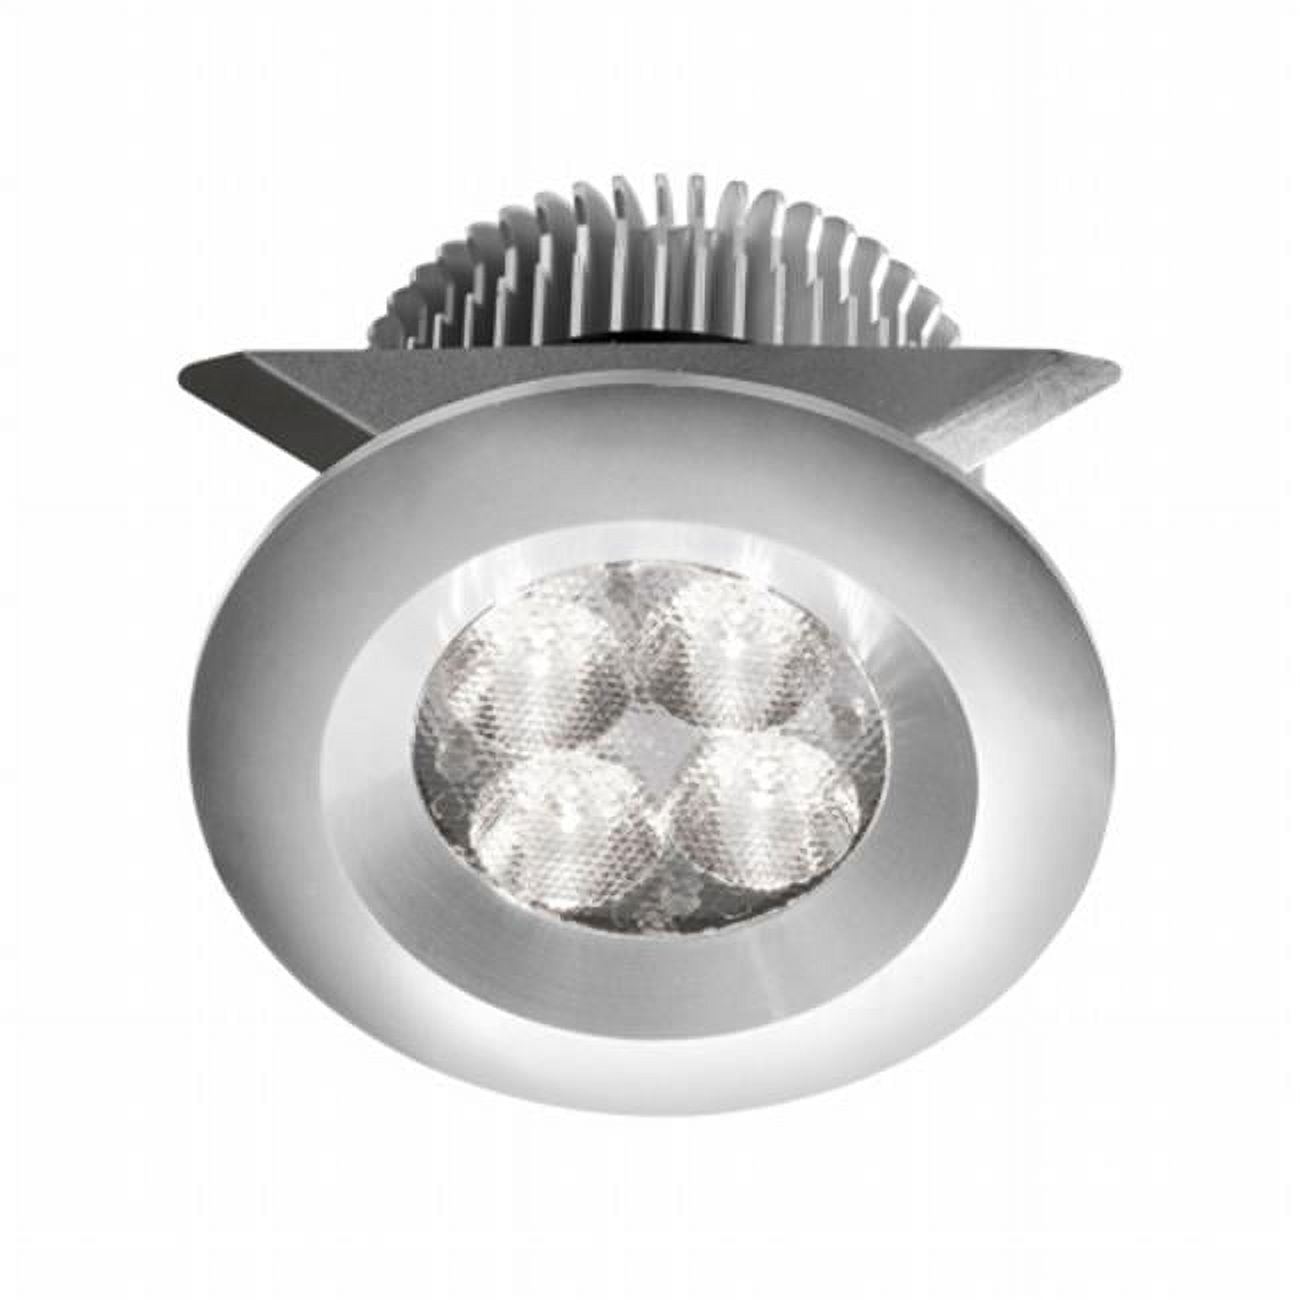 Aluminum 2 X 4w 3000k, Cri80 Plus, 25 Deg Beam, 24v Dc Input With Male Connector, 18 In. Dimmable Lead Wire